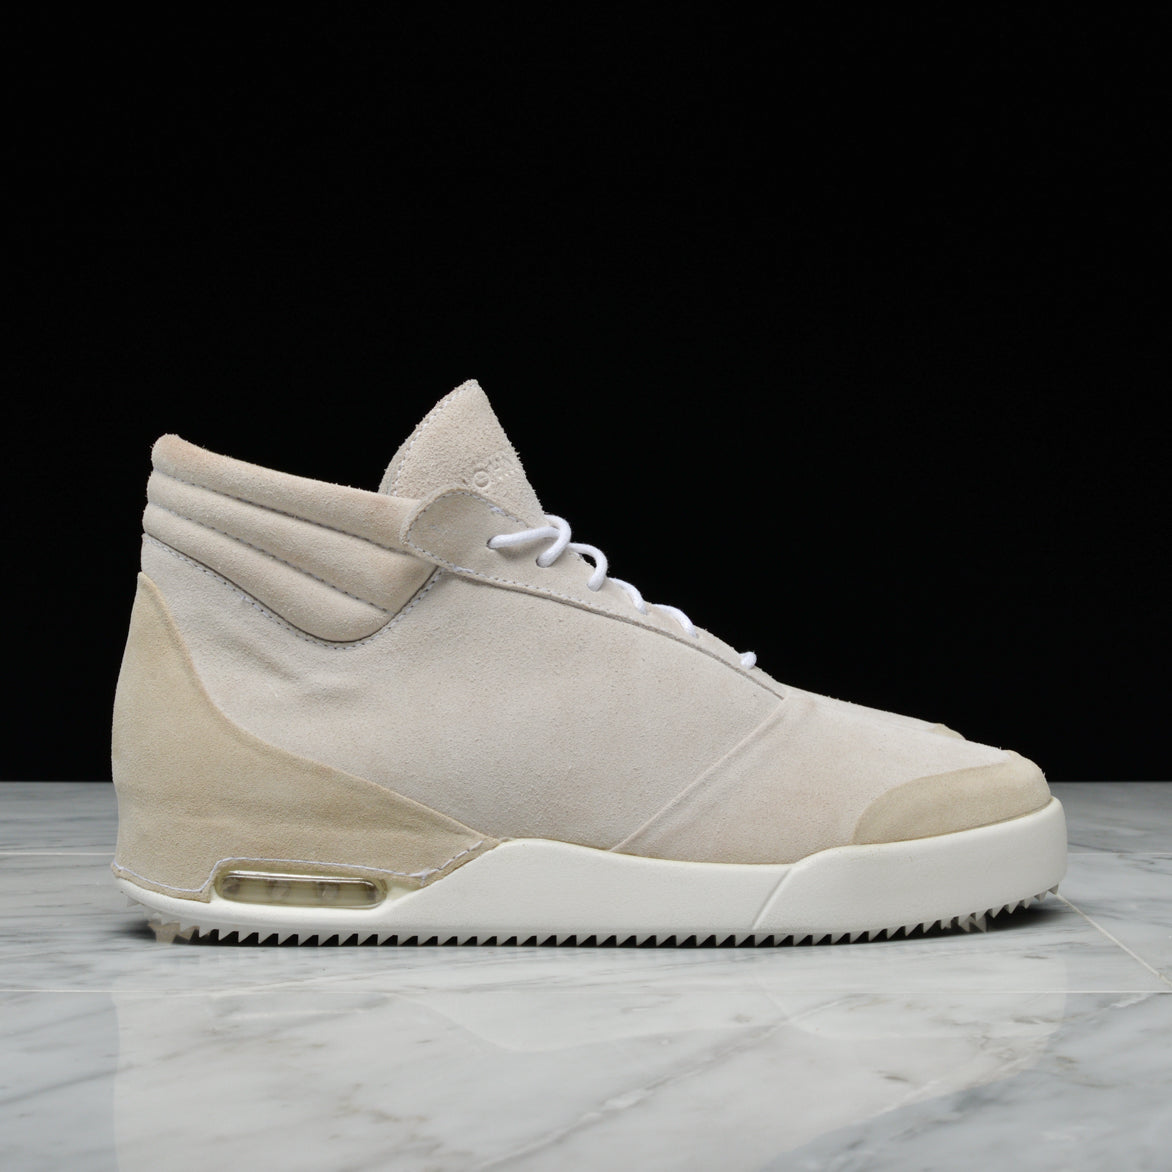 001 BY JOHN GEIGER - FROST / WHITE